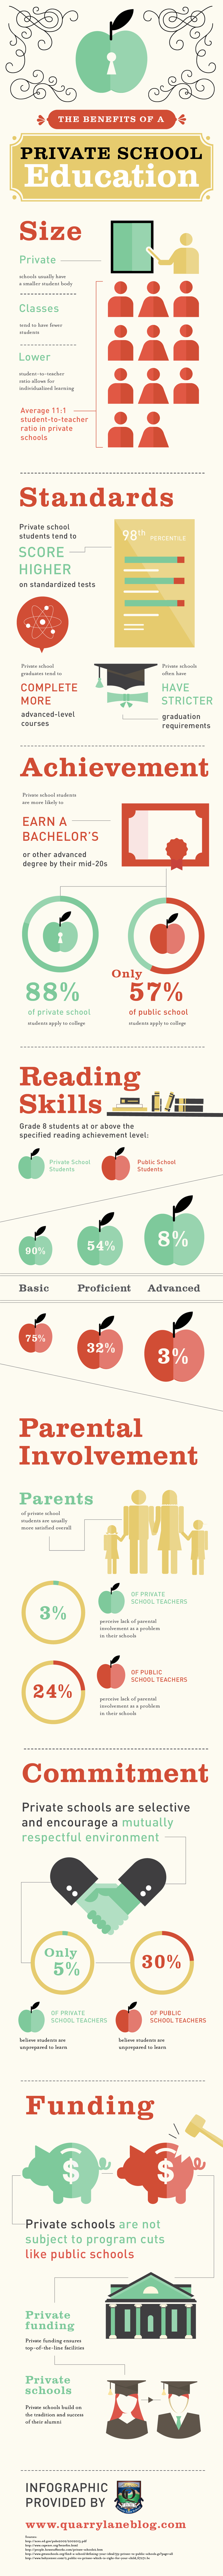 The-Benefits-of-a-Private-School-Education-Infographic